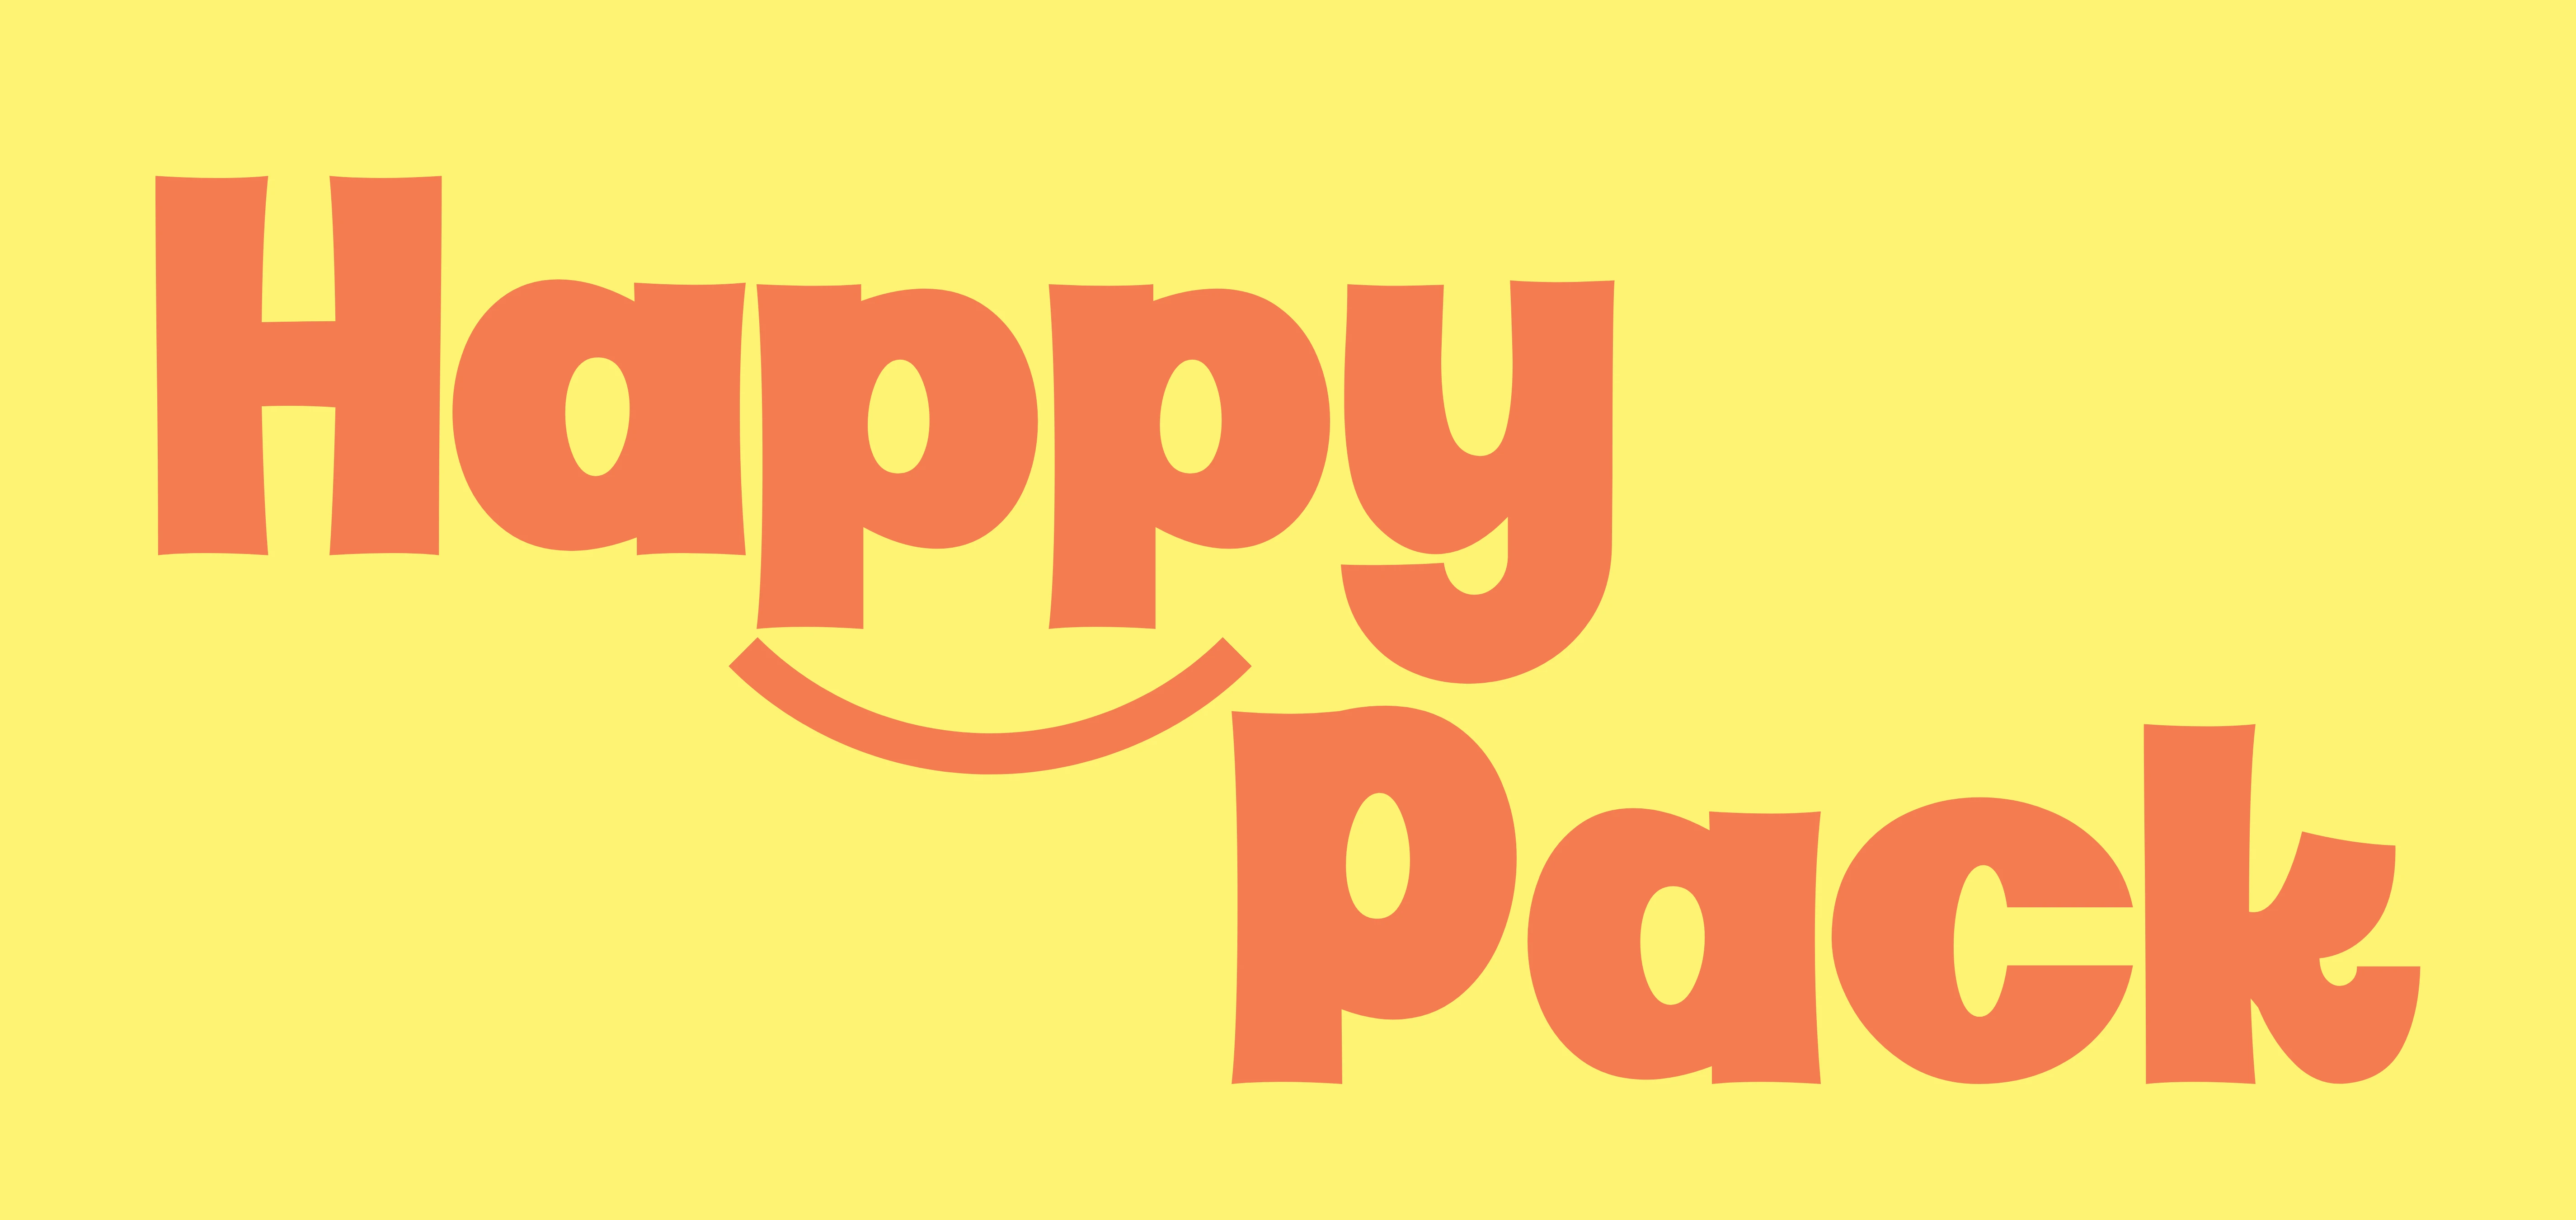 happypackofficial.co.uk